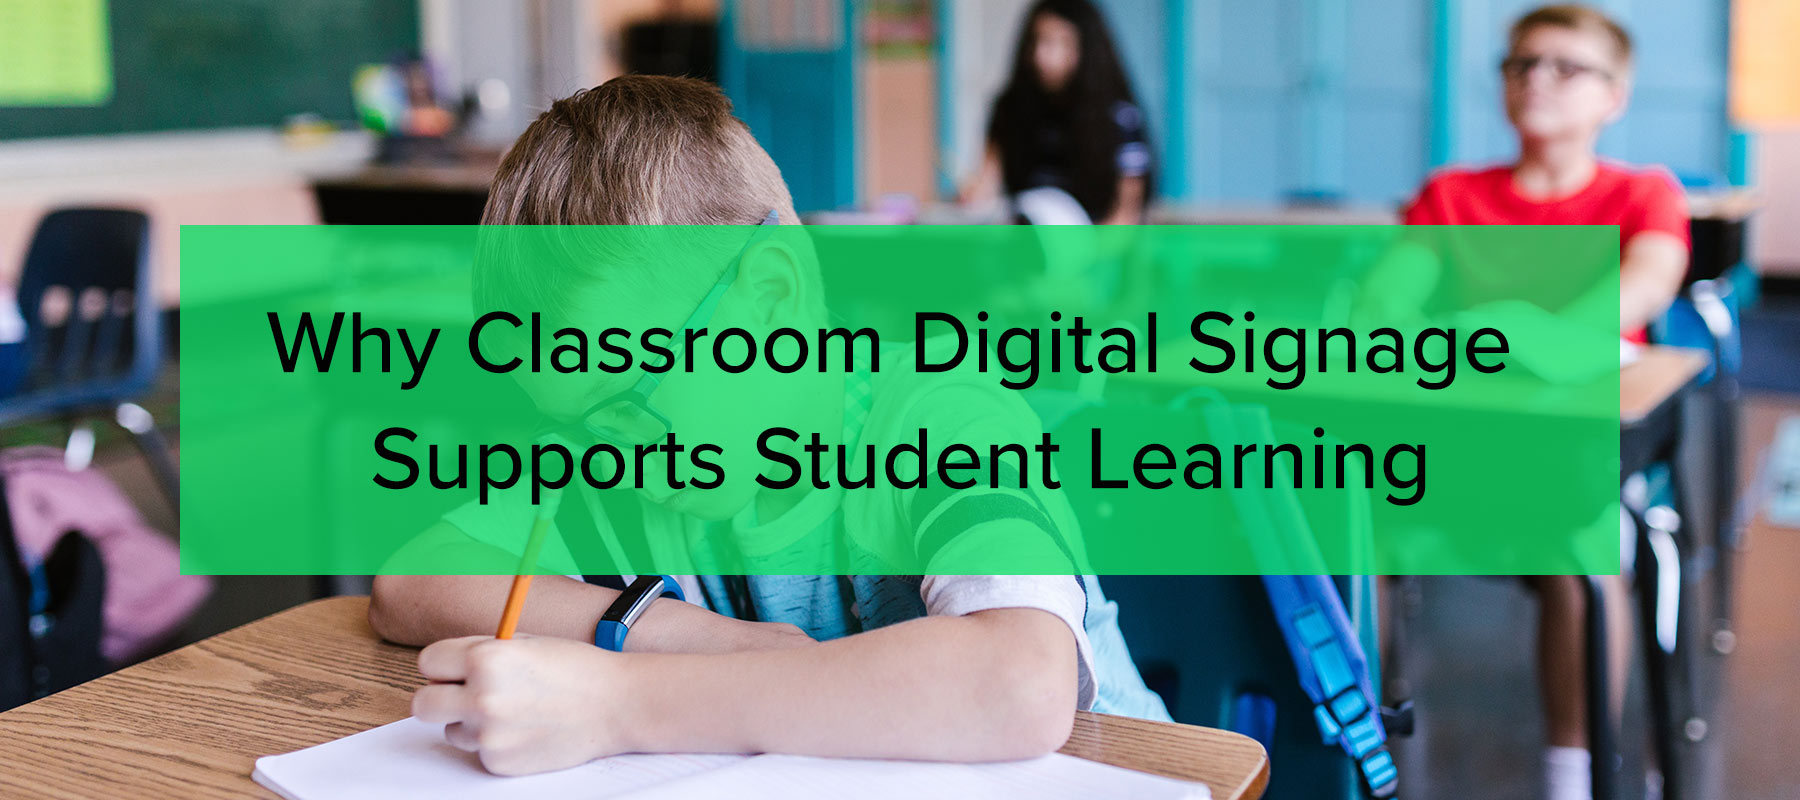 Why Classroom Digital Signage Supports Student Learning